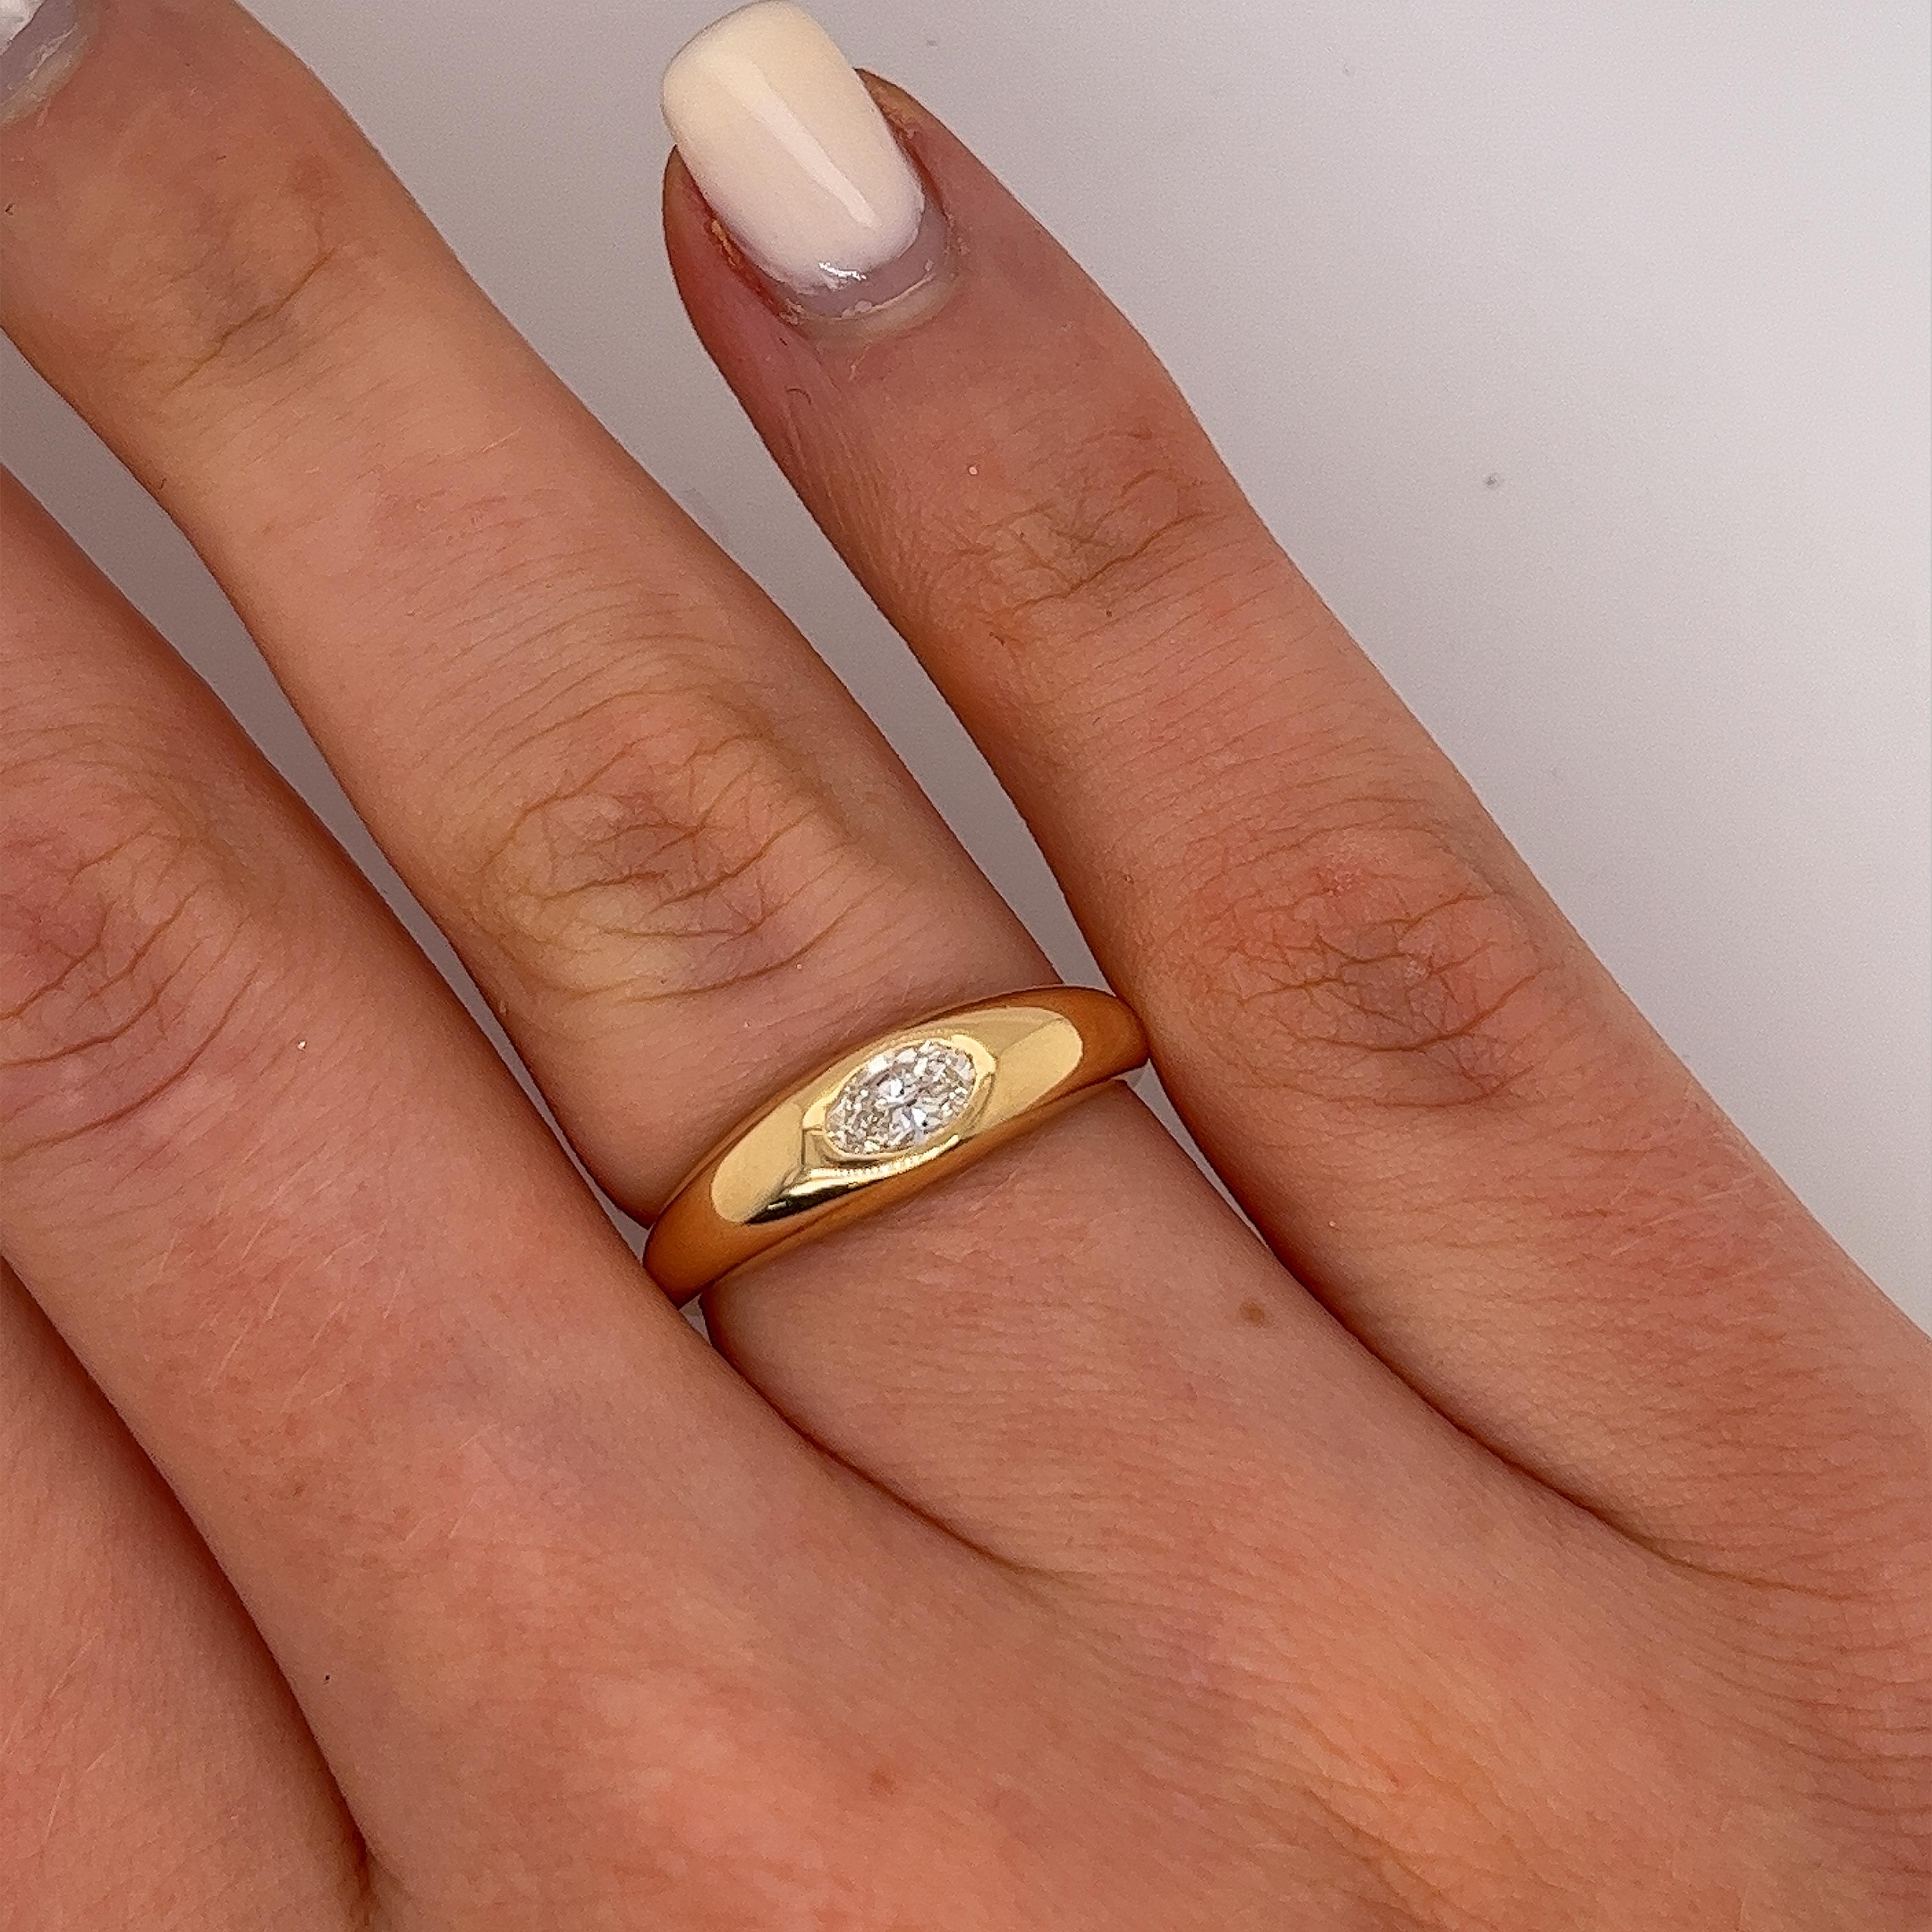 New made by Jewellery Cave 18ct yellow gold 
single stone ring, set with oval 0.30ct G/VS natural diamond.
The ring is a perfect complement to any ensemble 
and can be worn on any occasion.
Total Diamond Weight: 0.30ct 
Total  Weight: 5.2g
Ring